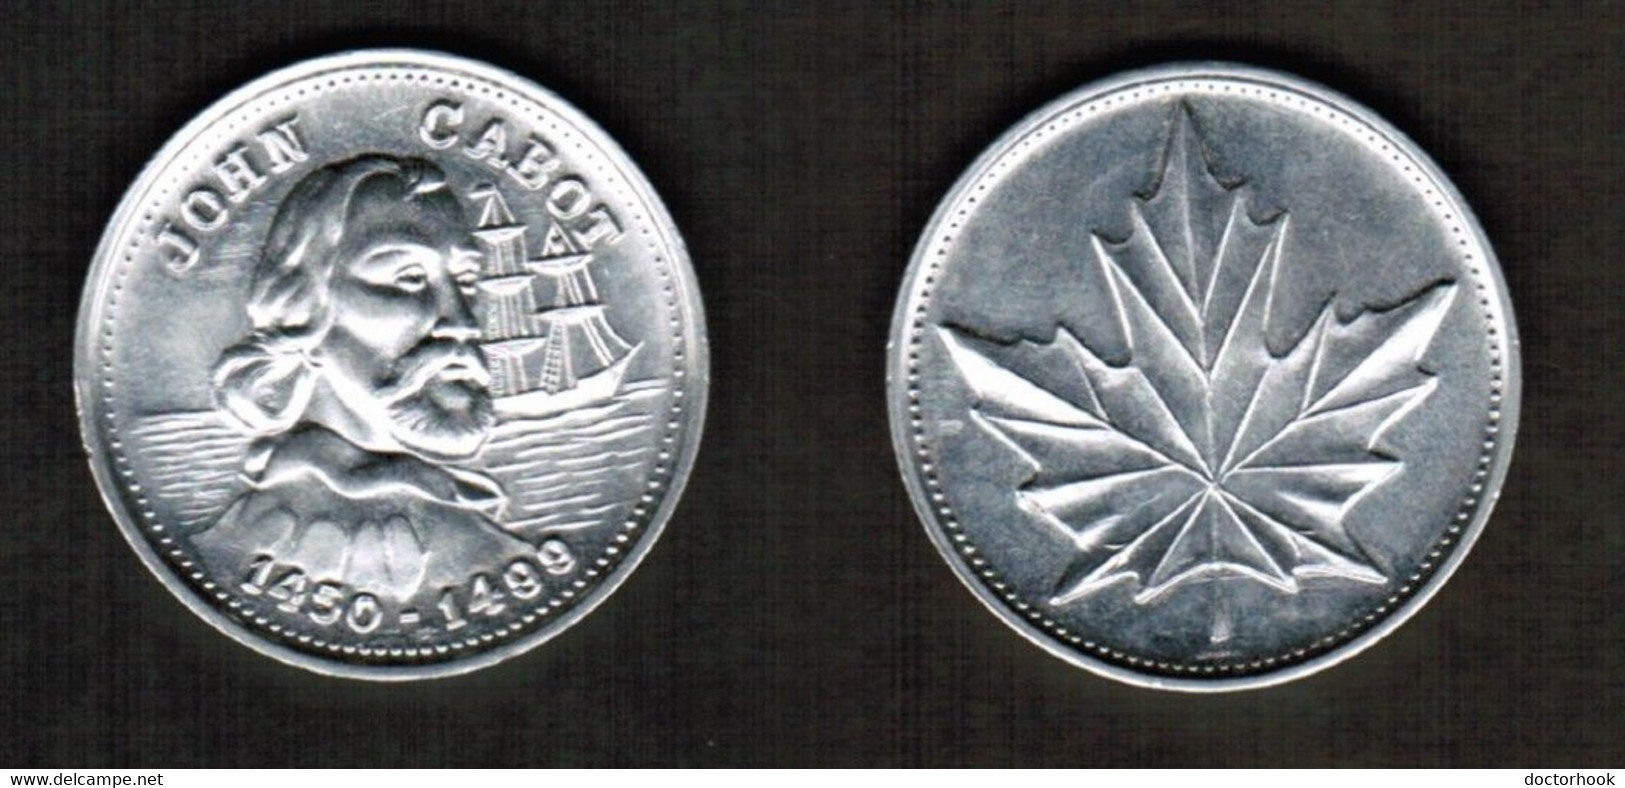 CANADA   MAPLE LEAF "JOHN CABOT" TOKEN N#68896 (CONDITION AS PER SCAN) (T-149) - Firma's